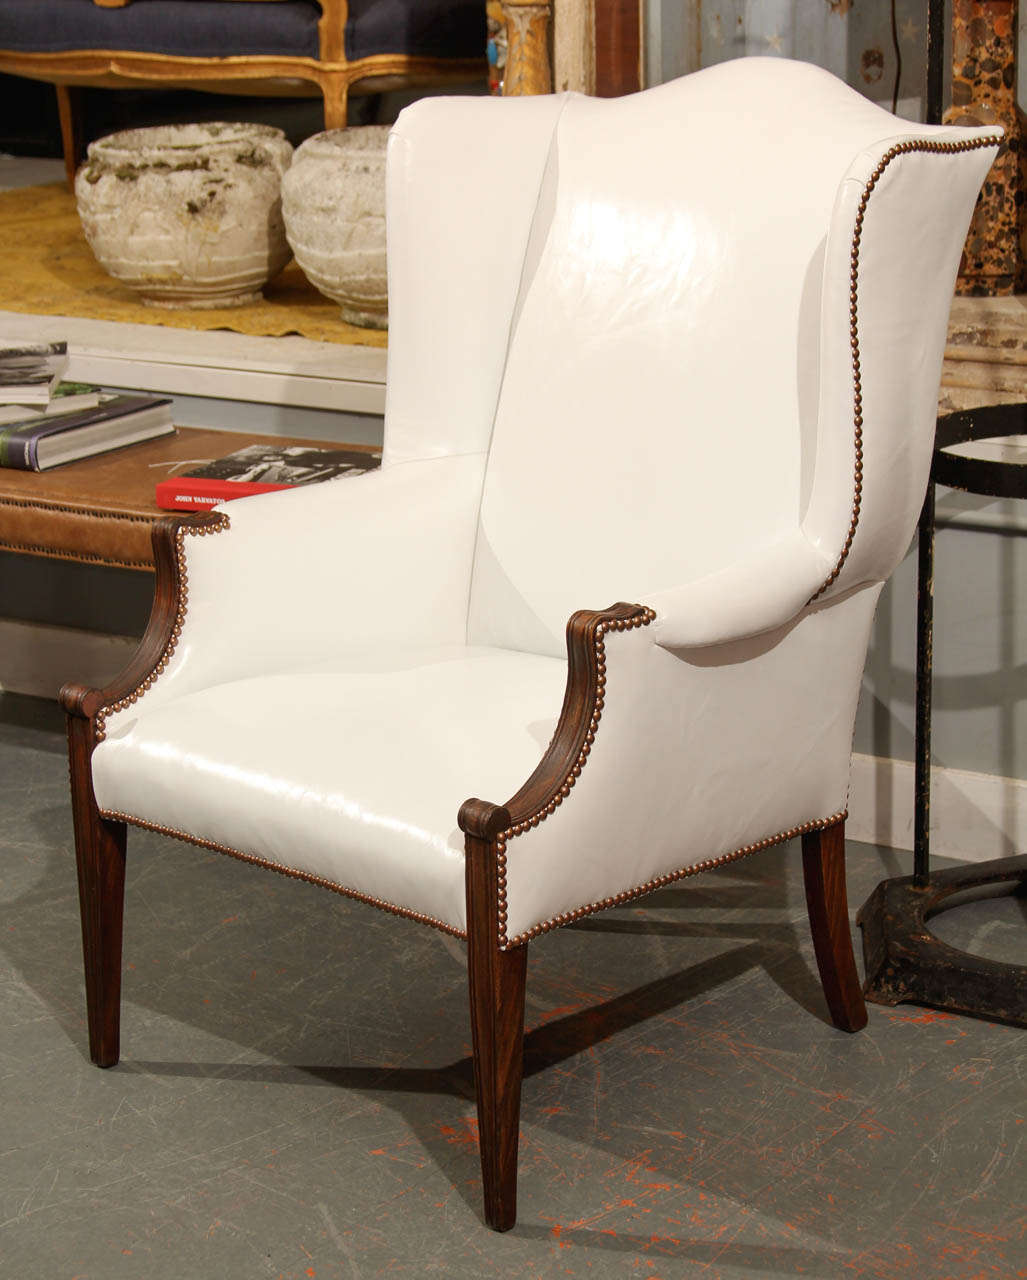 curvy white leather wing chair with nailhead trim.